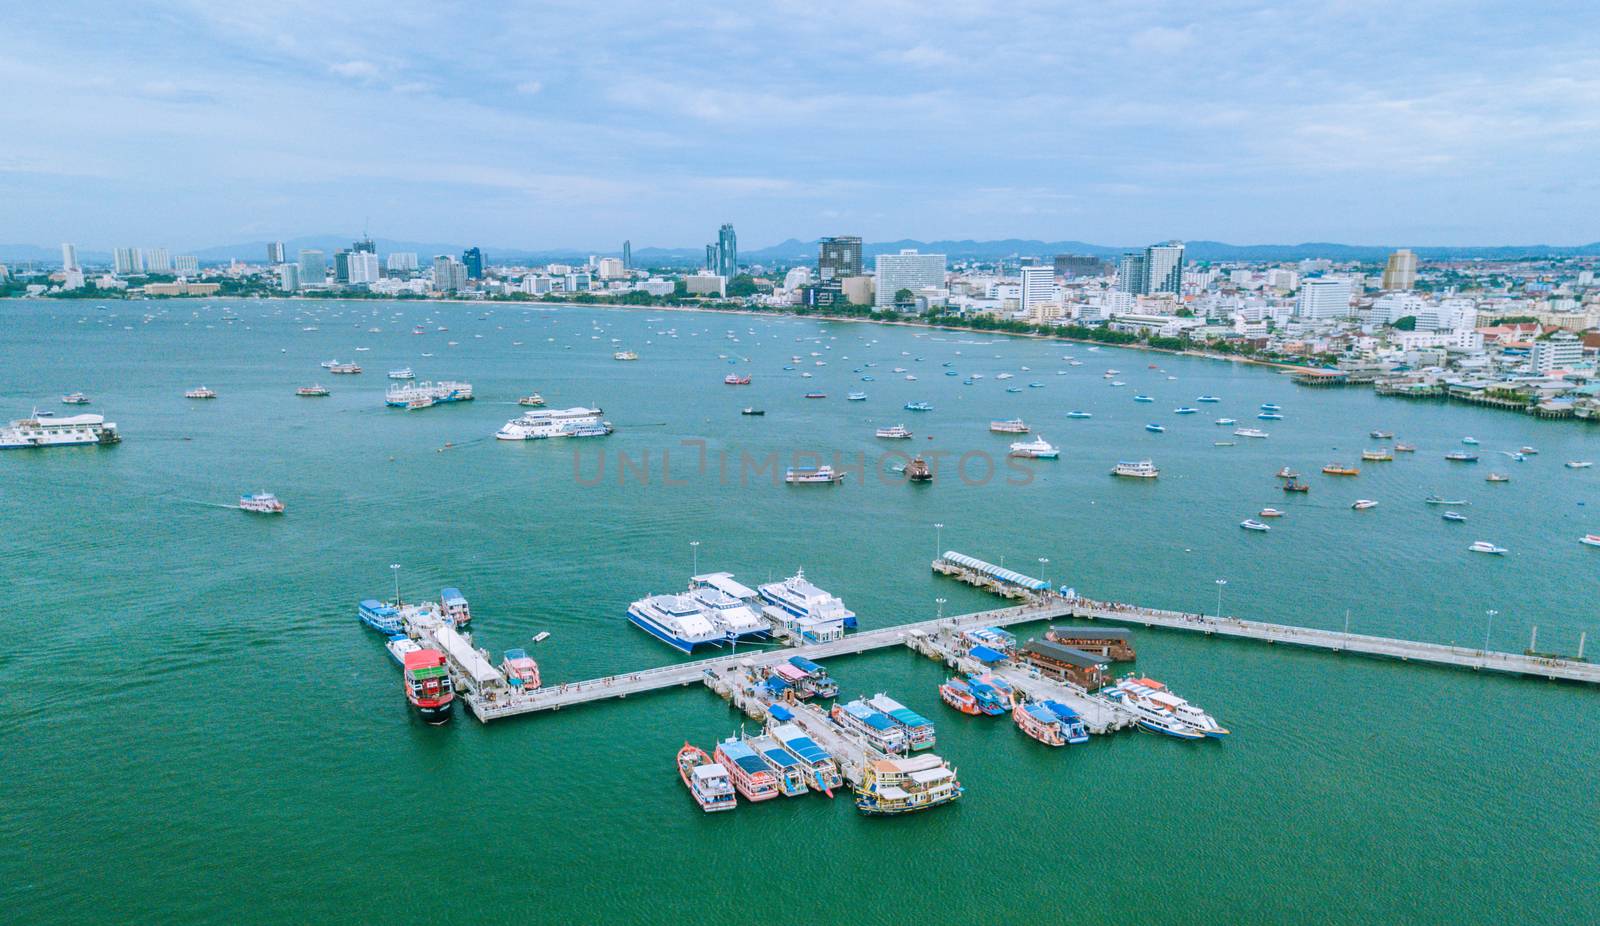 Pattaya cityscape aerial view from the sea by antpkr